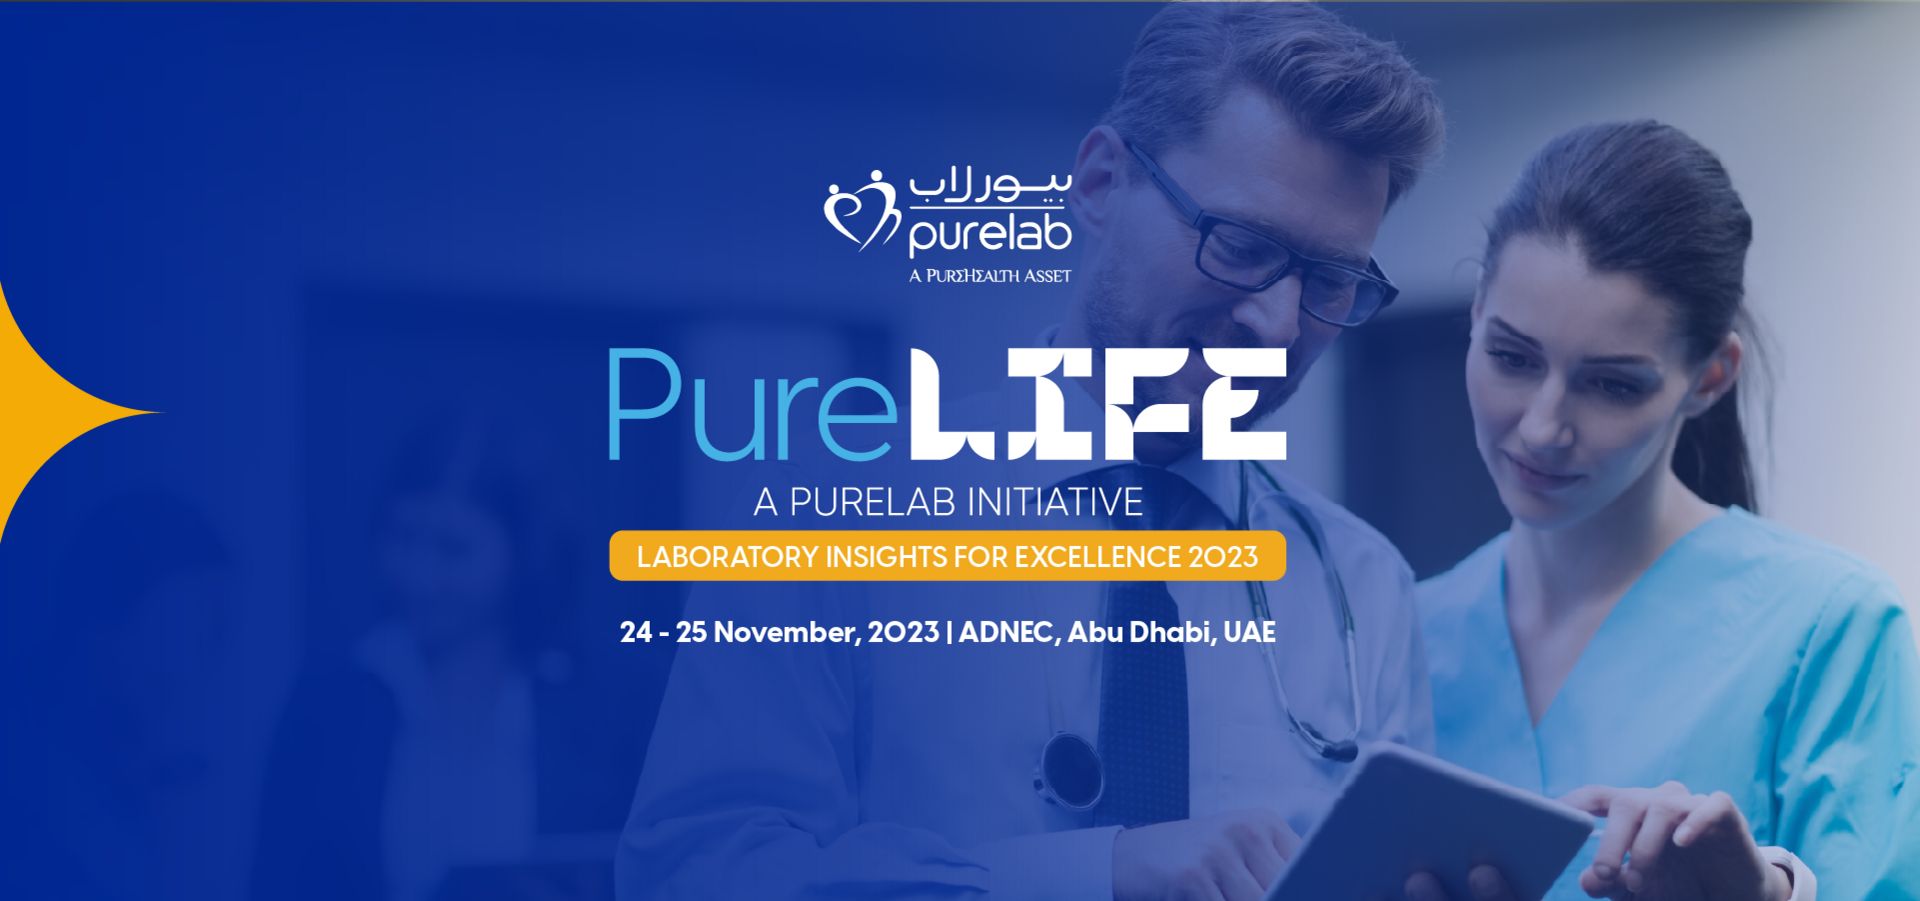 PureLIFE - Laboratory Insights for Excellence, 2023